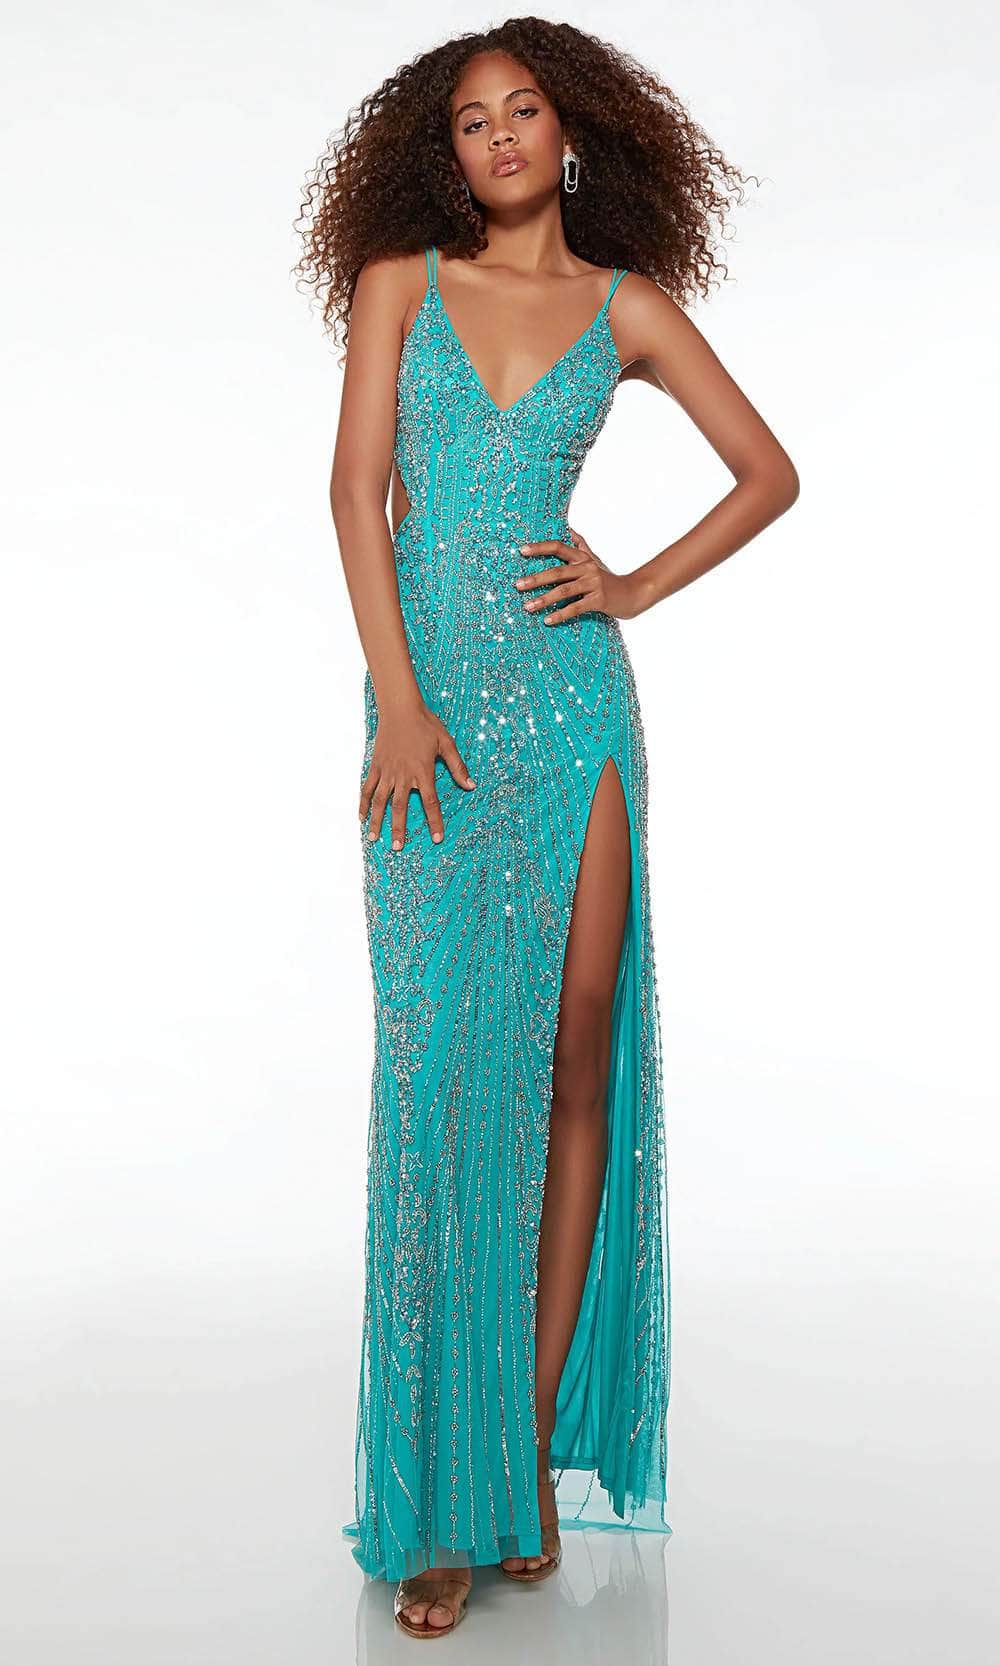 Image of Alyce Paris 61585 - Jeweled Deep V-Neck Prom Gown